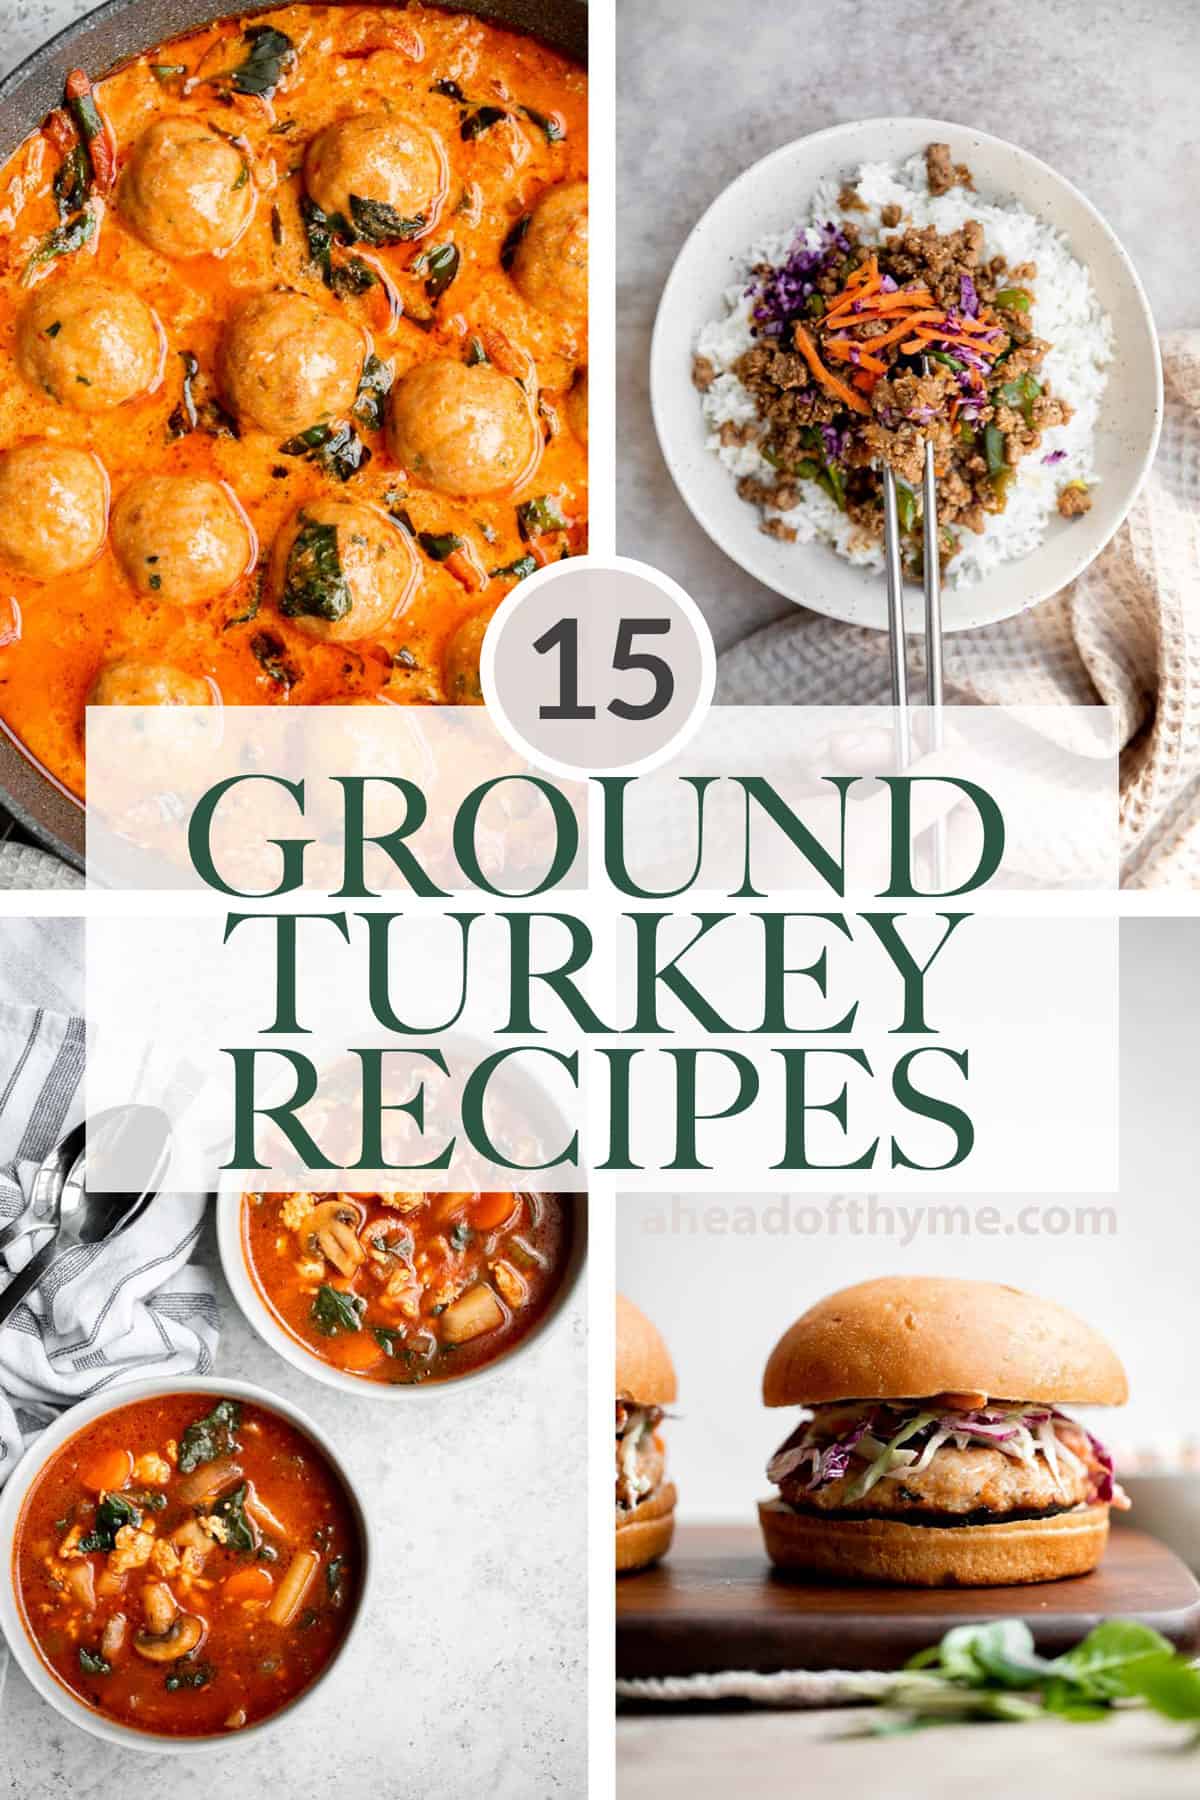 Over 15 best ground turkey recipes including meatballs, burgers, soup, pasta, and more! Perfect for quick and easy weeknight dinners or special occasions. | aheadofthyme.com